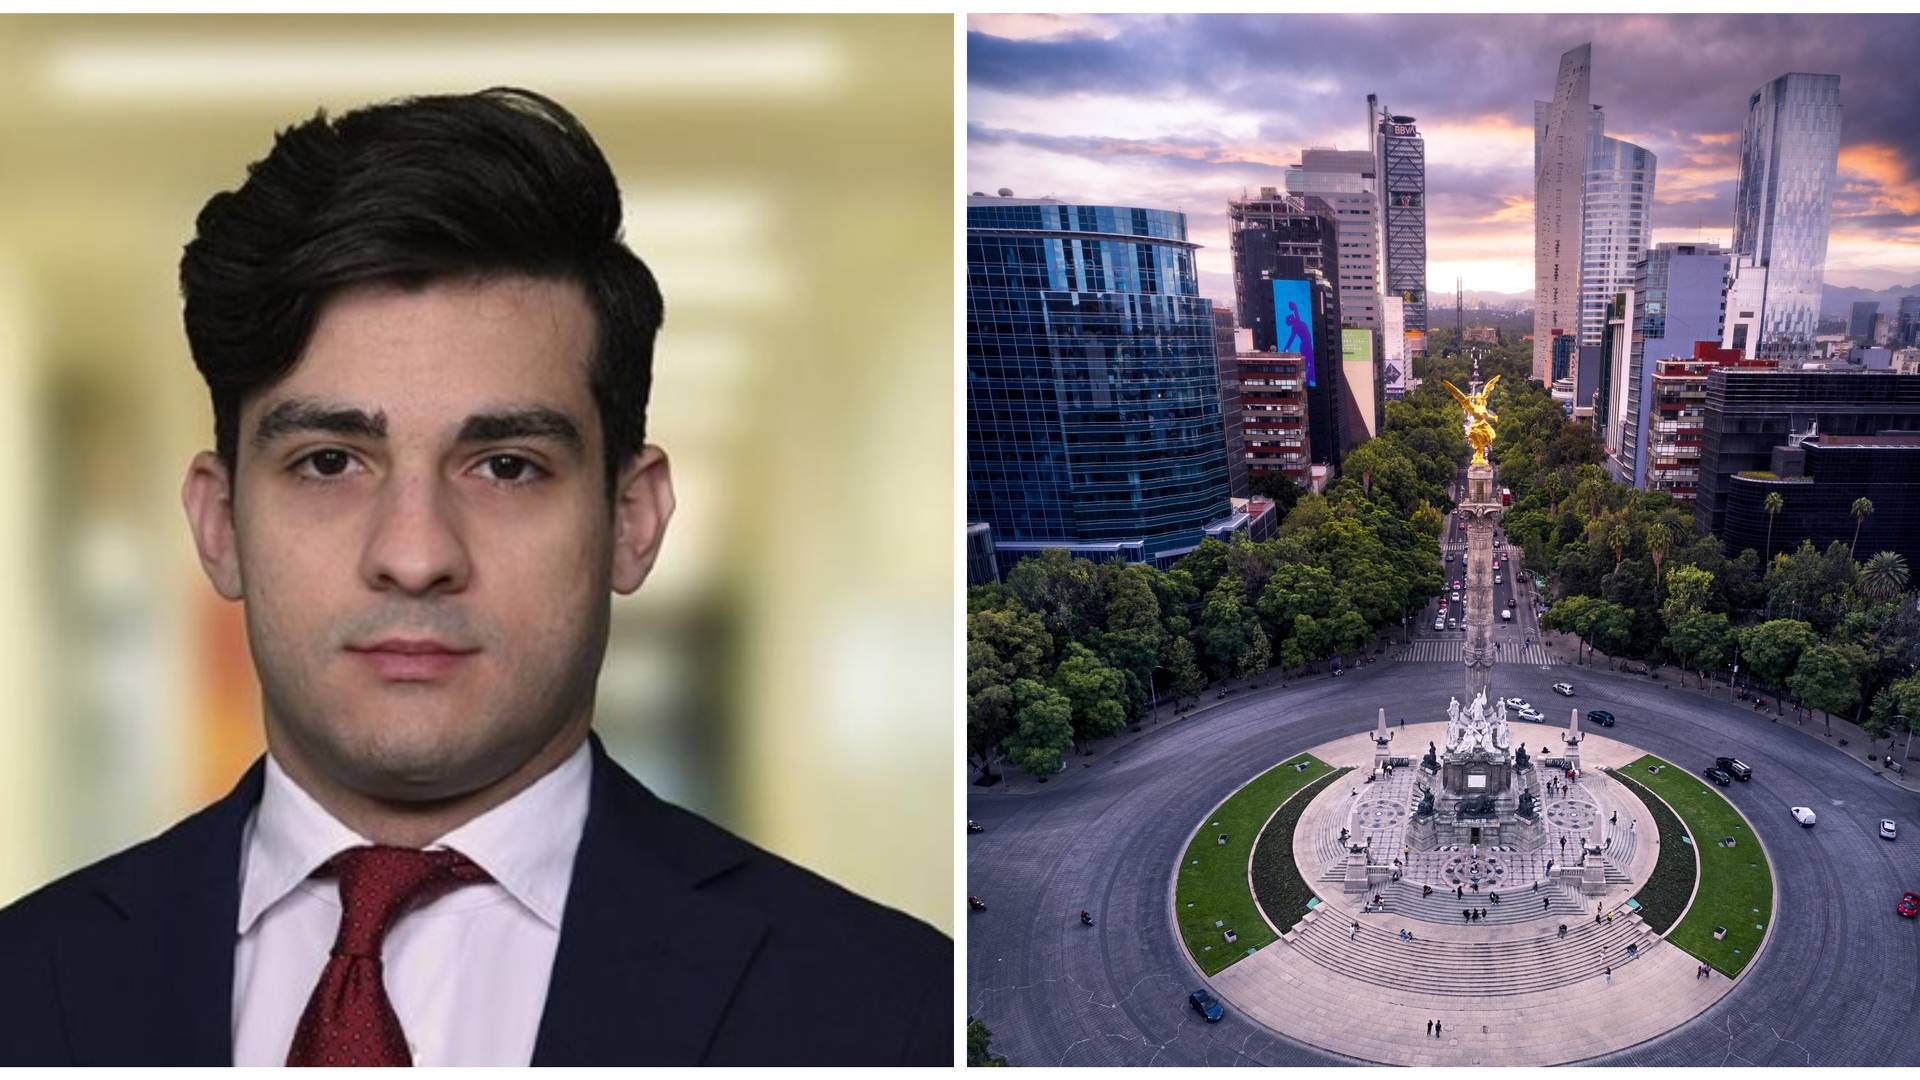 "There is a bit more political stability in Mexico than in several other countries in the region," says Valerio Angioni, Investment Director for Fixed Income at Jupiter Asset Management. | Photo: Jupiter AM PR and Pexels: Alex Wolf.